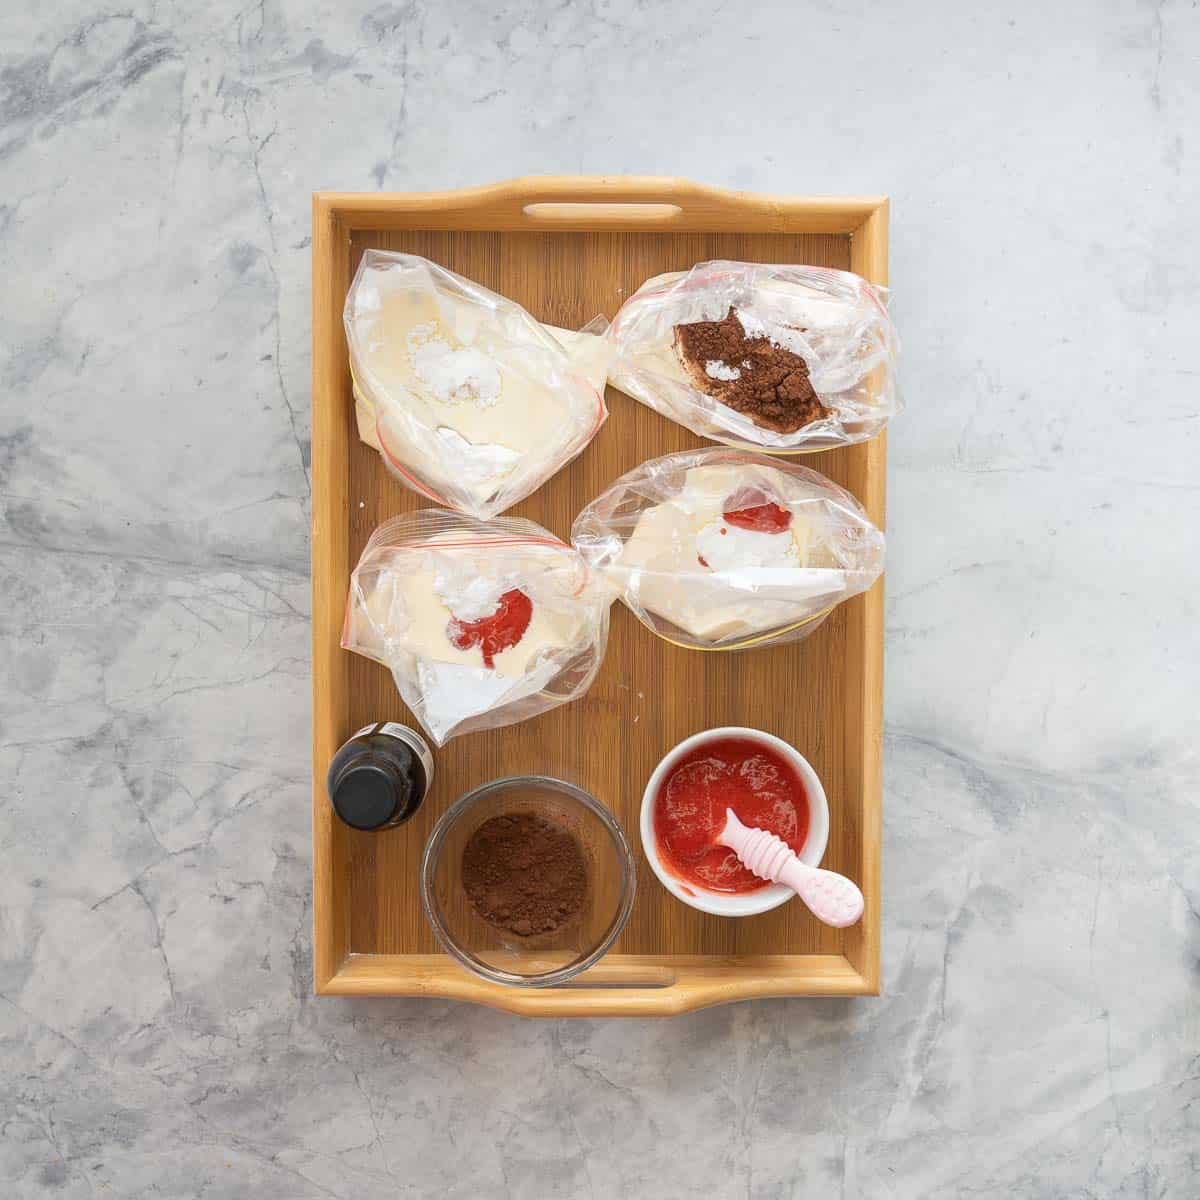 Three zip lock bags of cream on a wooden tray with small bowls of strawberry puree, cocoa and vanilla extract.